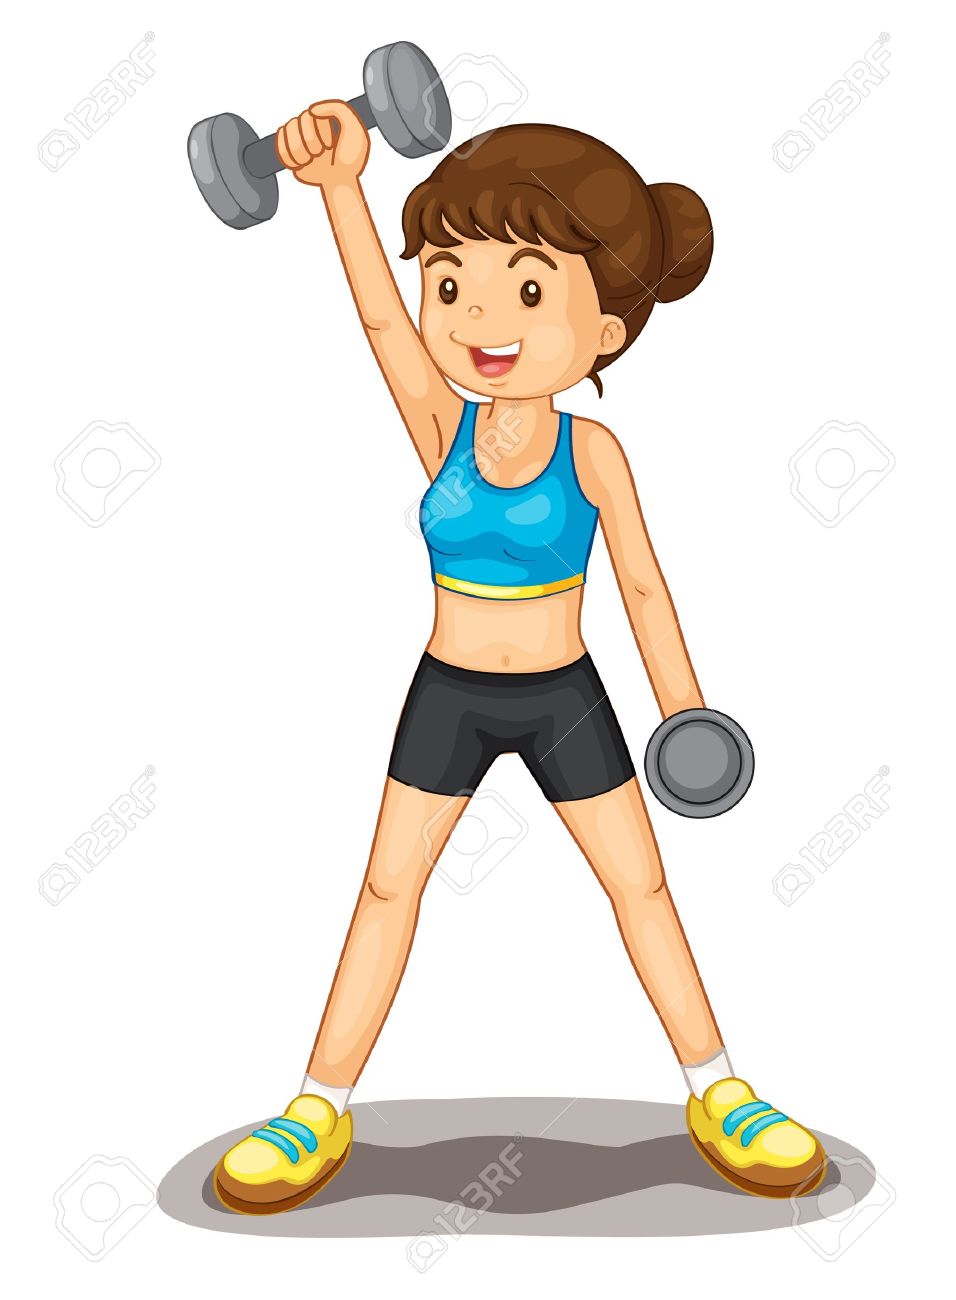 workout clipart images - photo #8